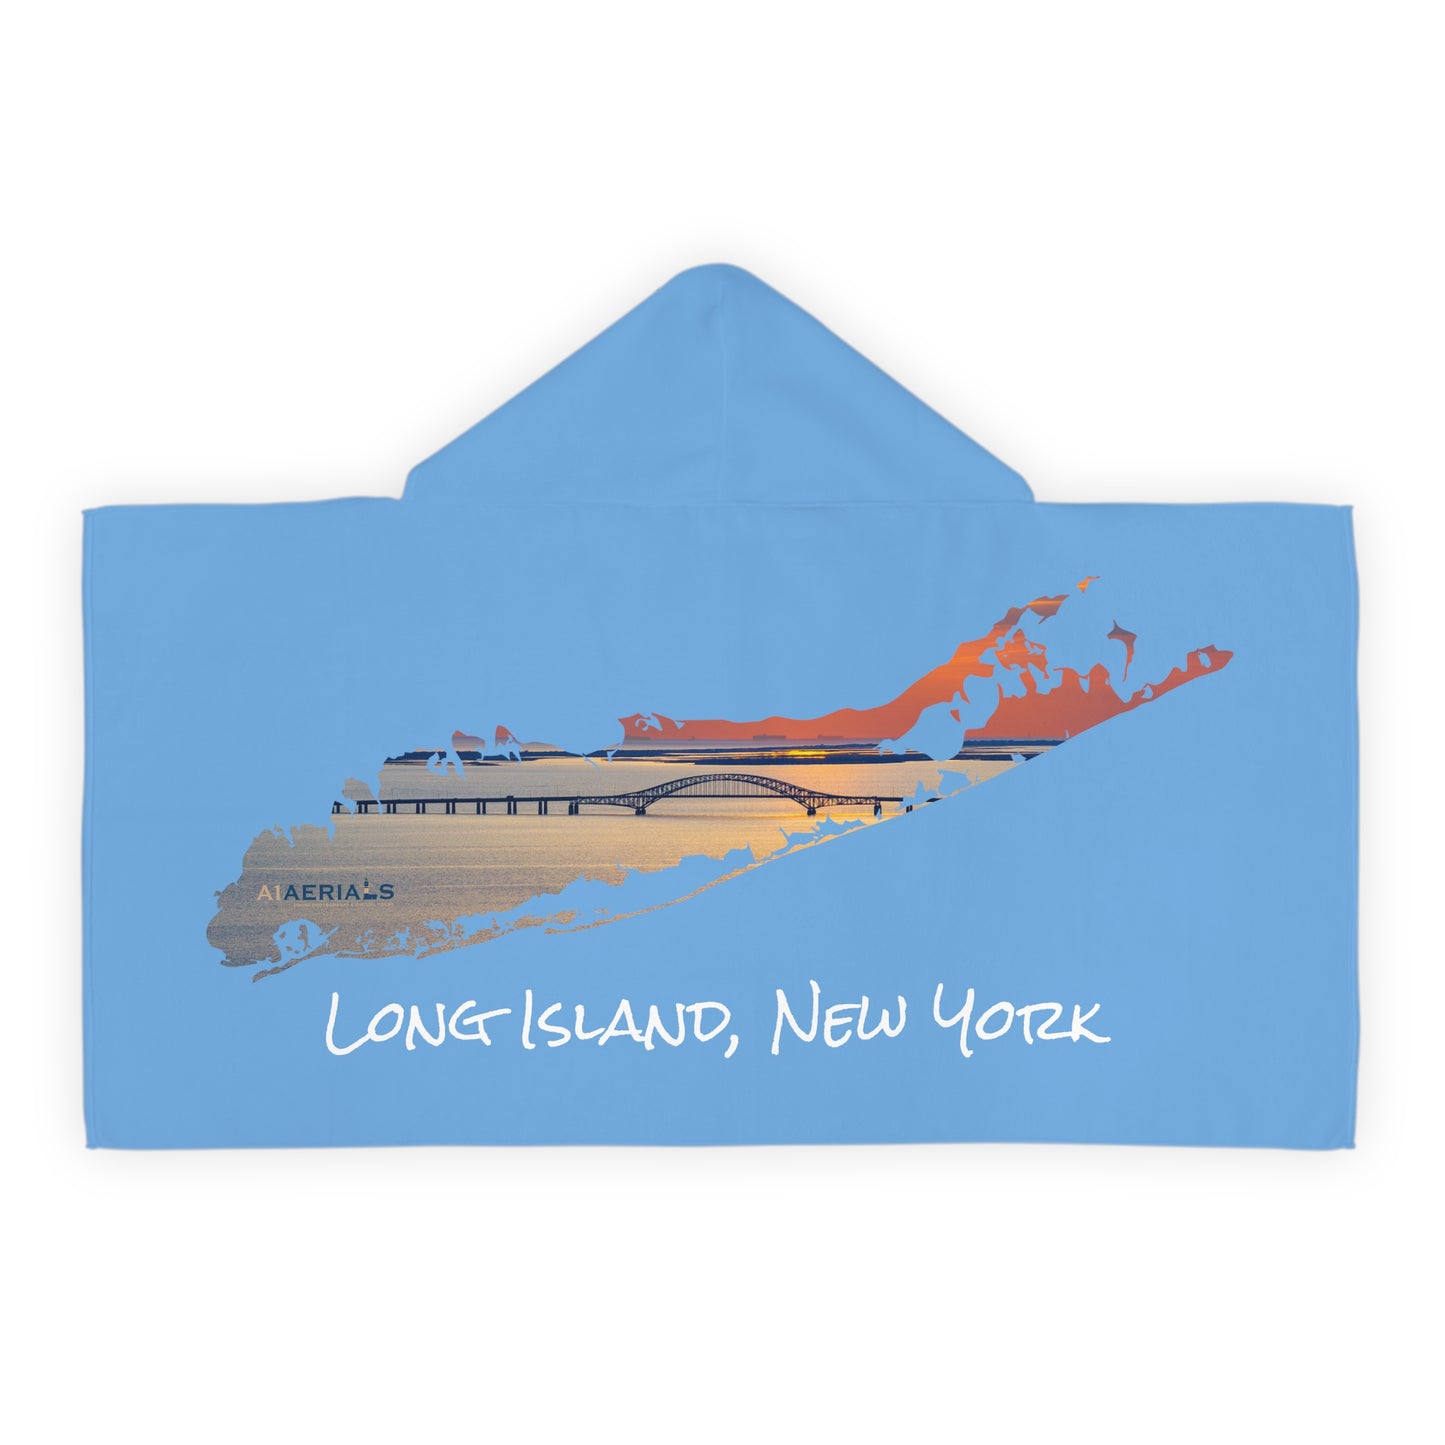 Youth Hooded Towel Blue - Great South Bay Bridge